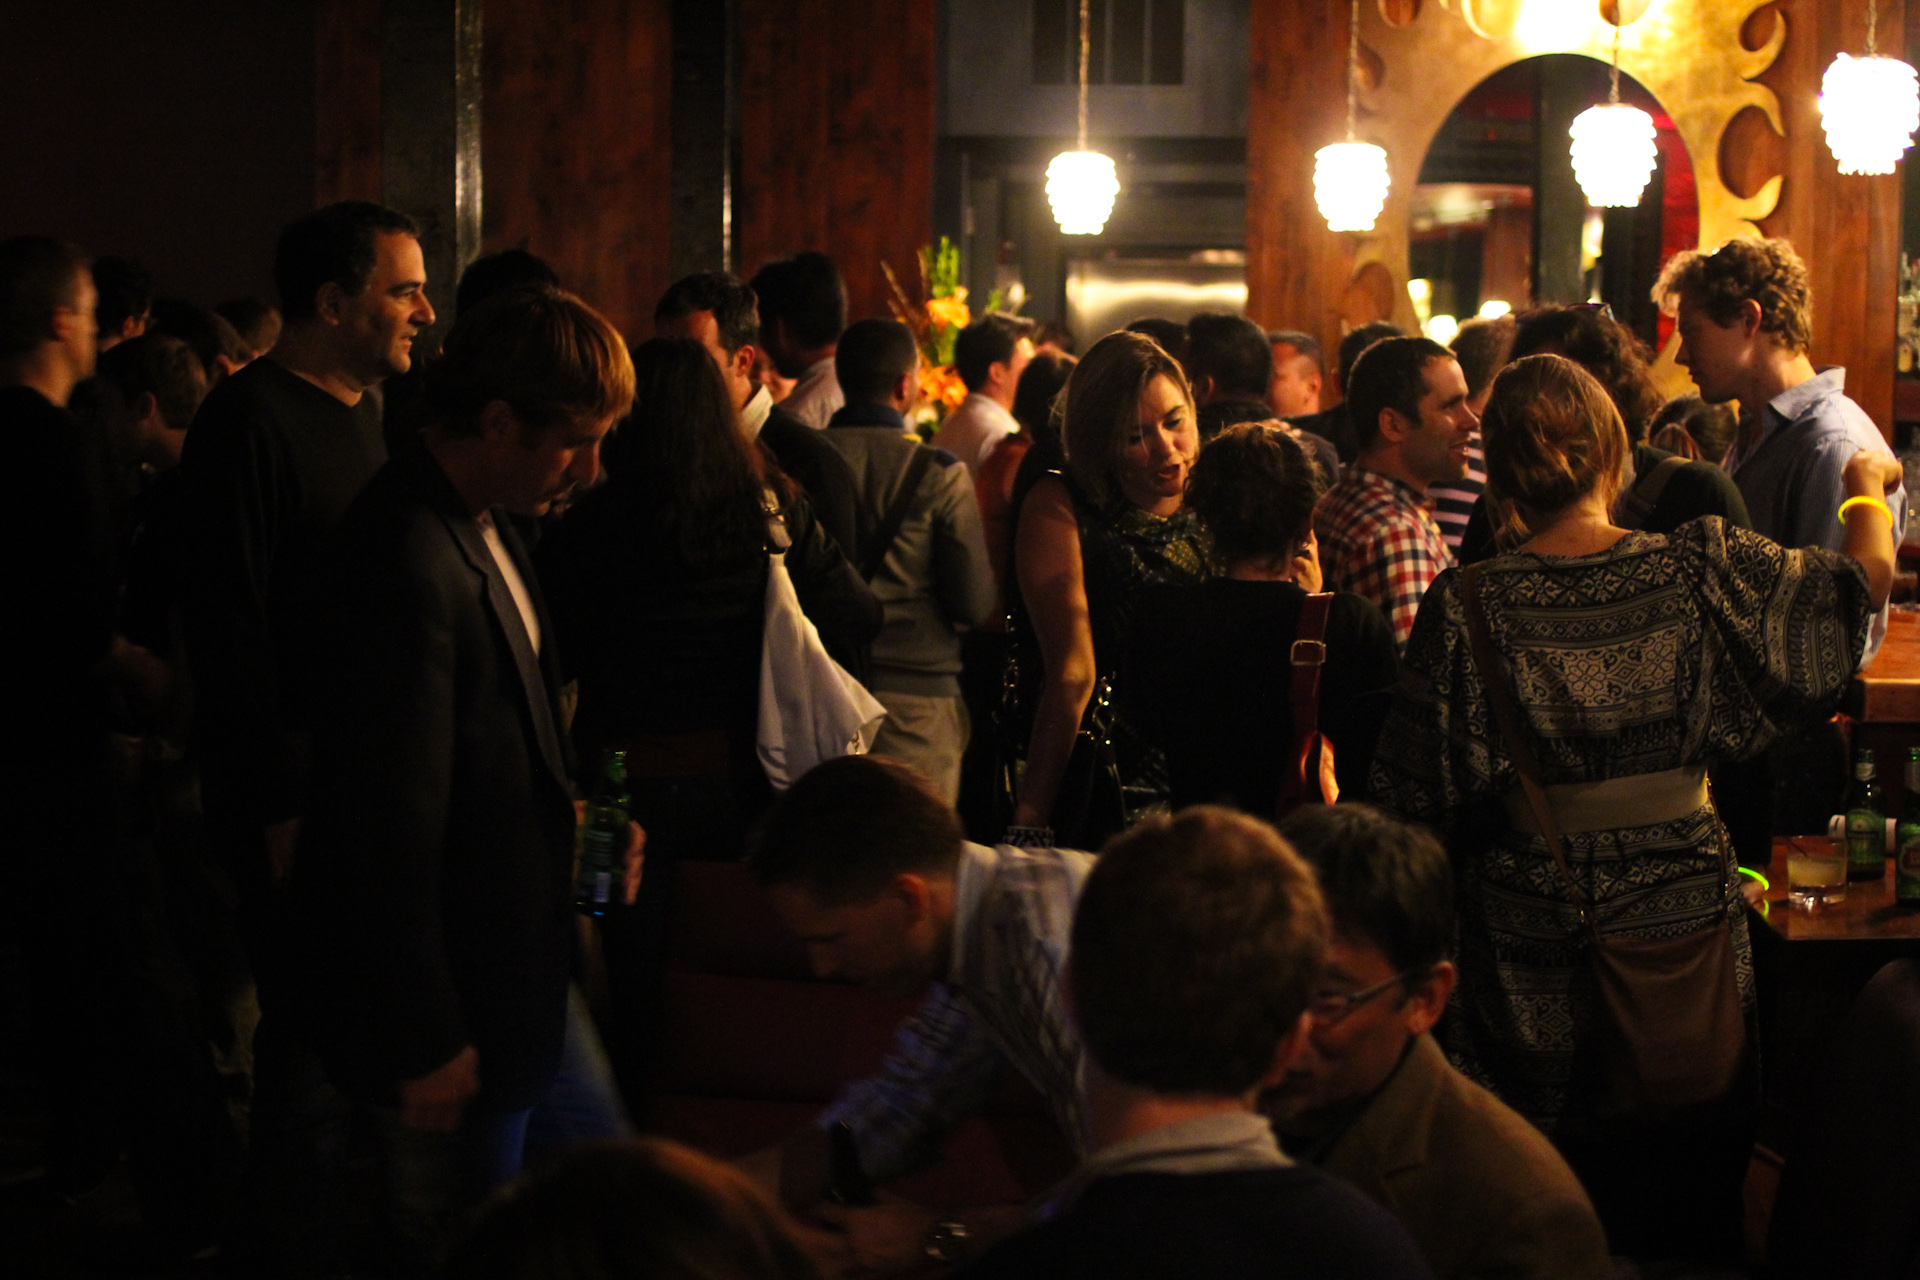 a large group of people gather in the bar area